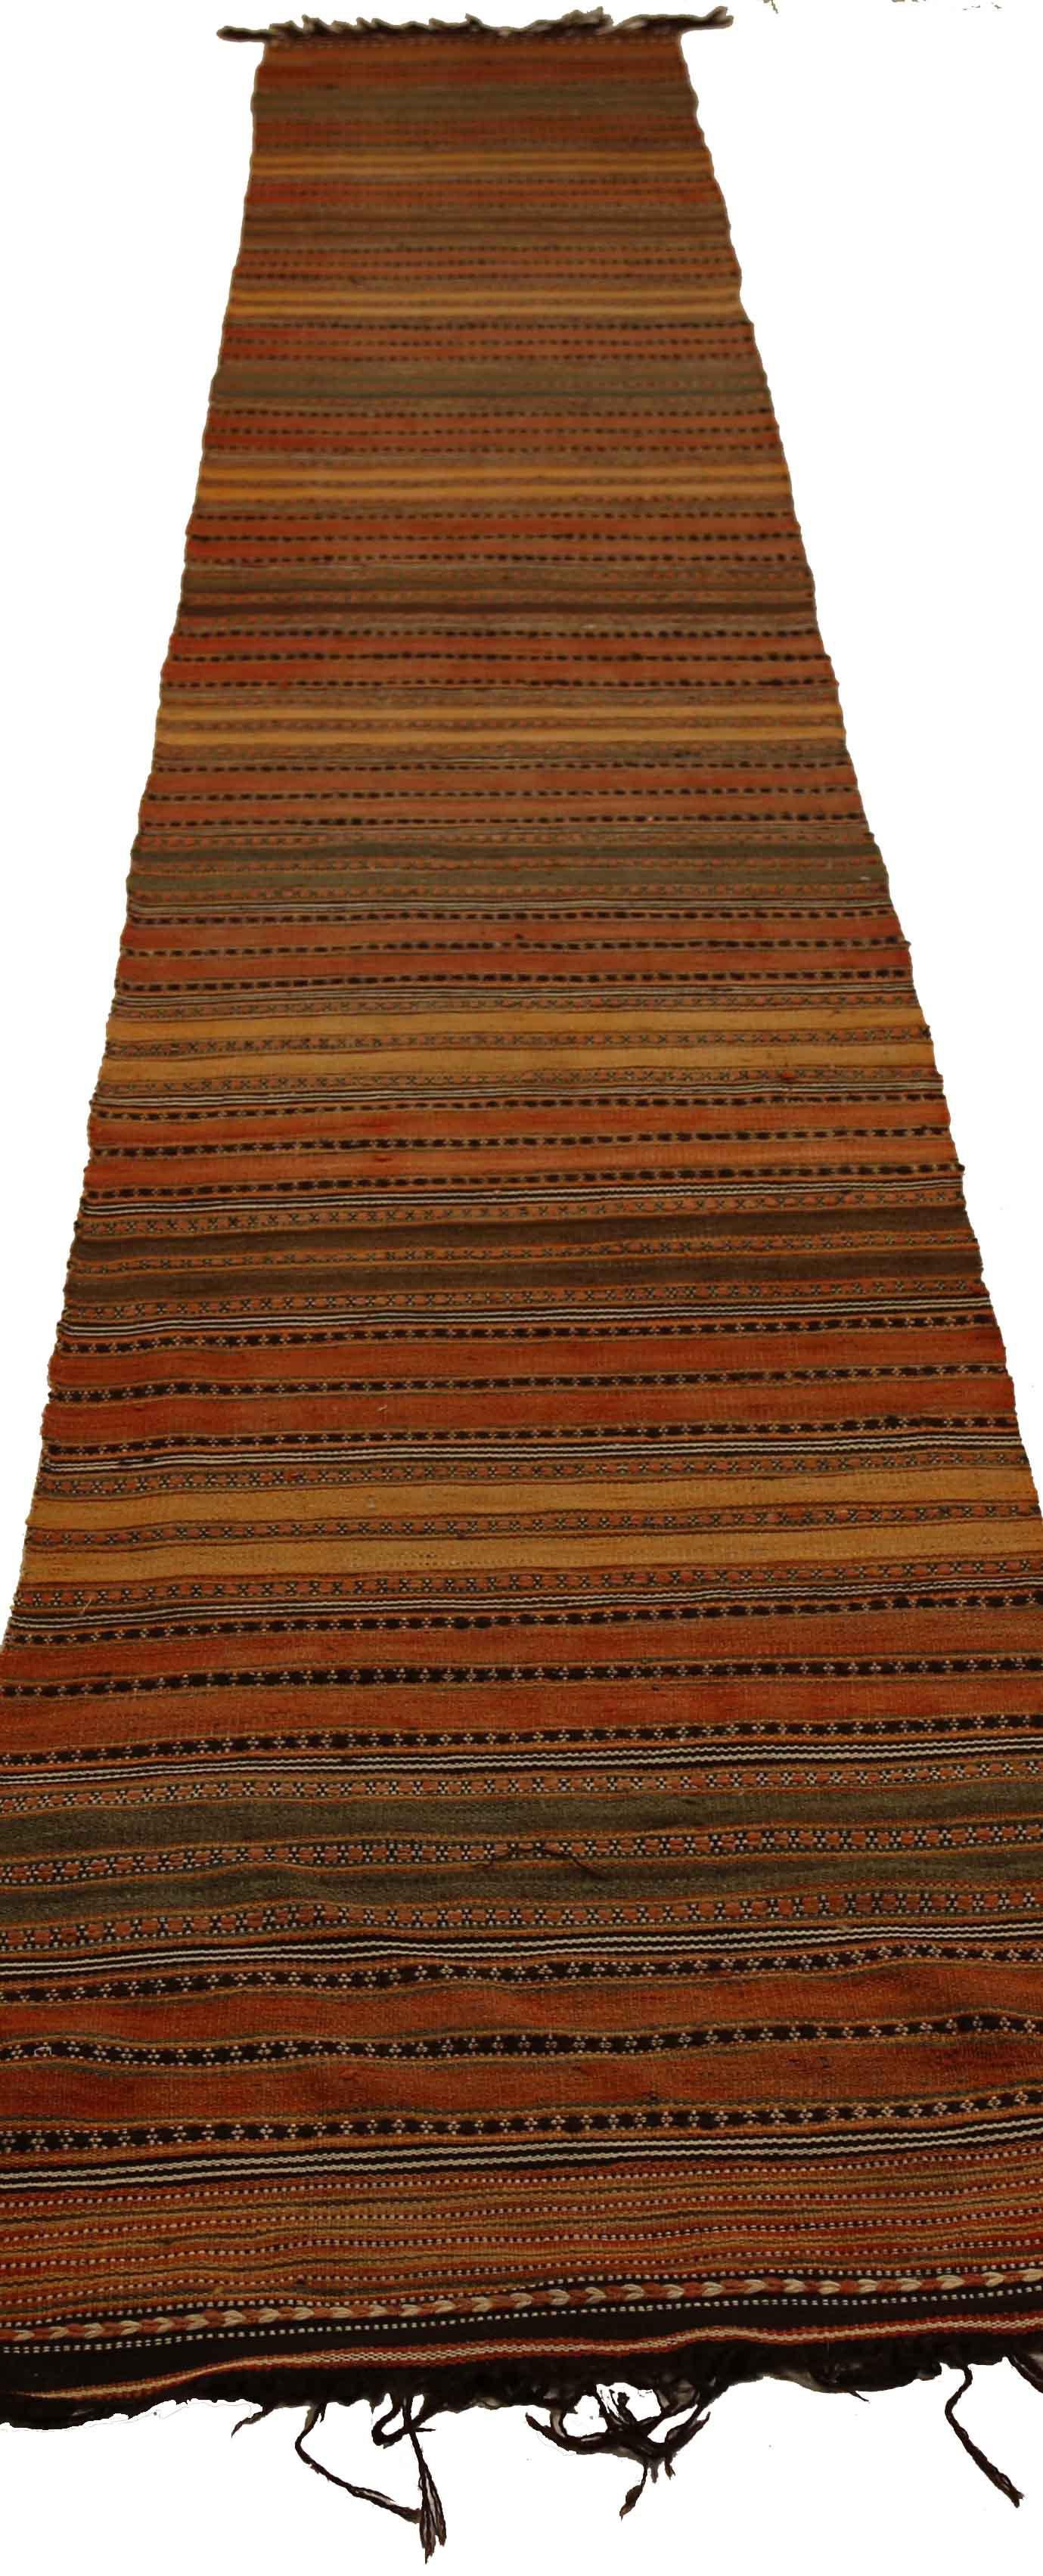 Antique handmade Persian runner rug from high quality sheep’s wool and colored with eco-friendly vegetable dyes that are proven safe for humans and pets alike. It’s a Classic Kilim design showcasing rust and orange stripes on a regal brown field.